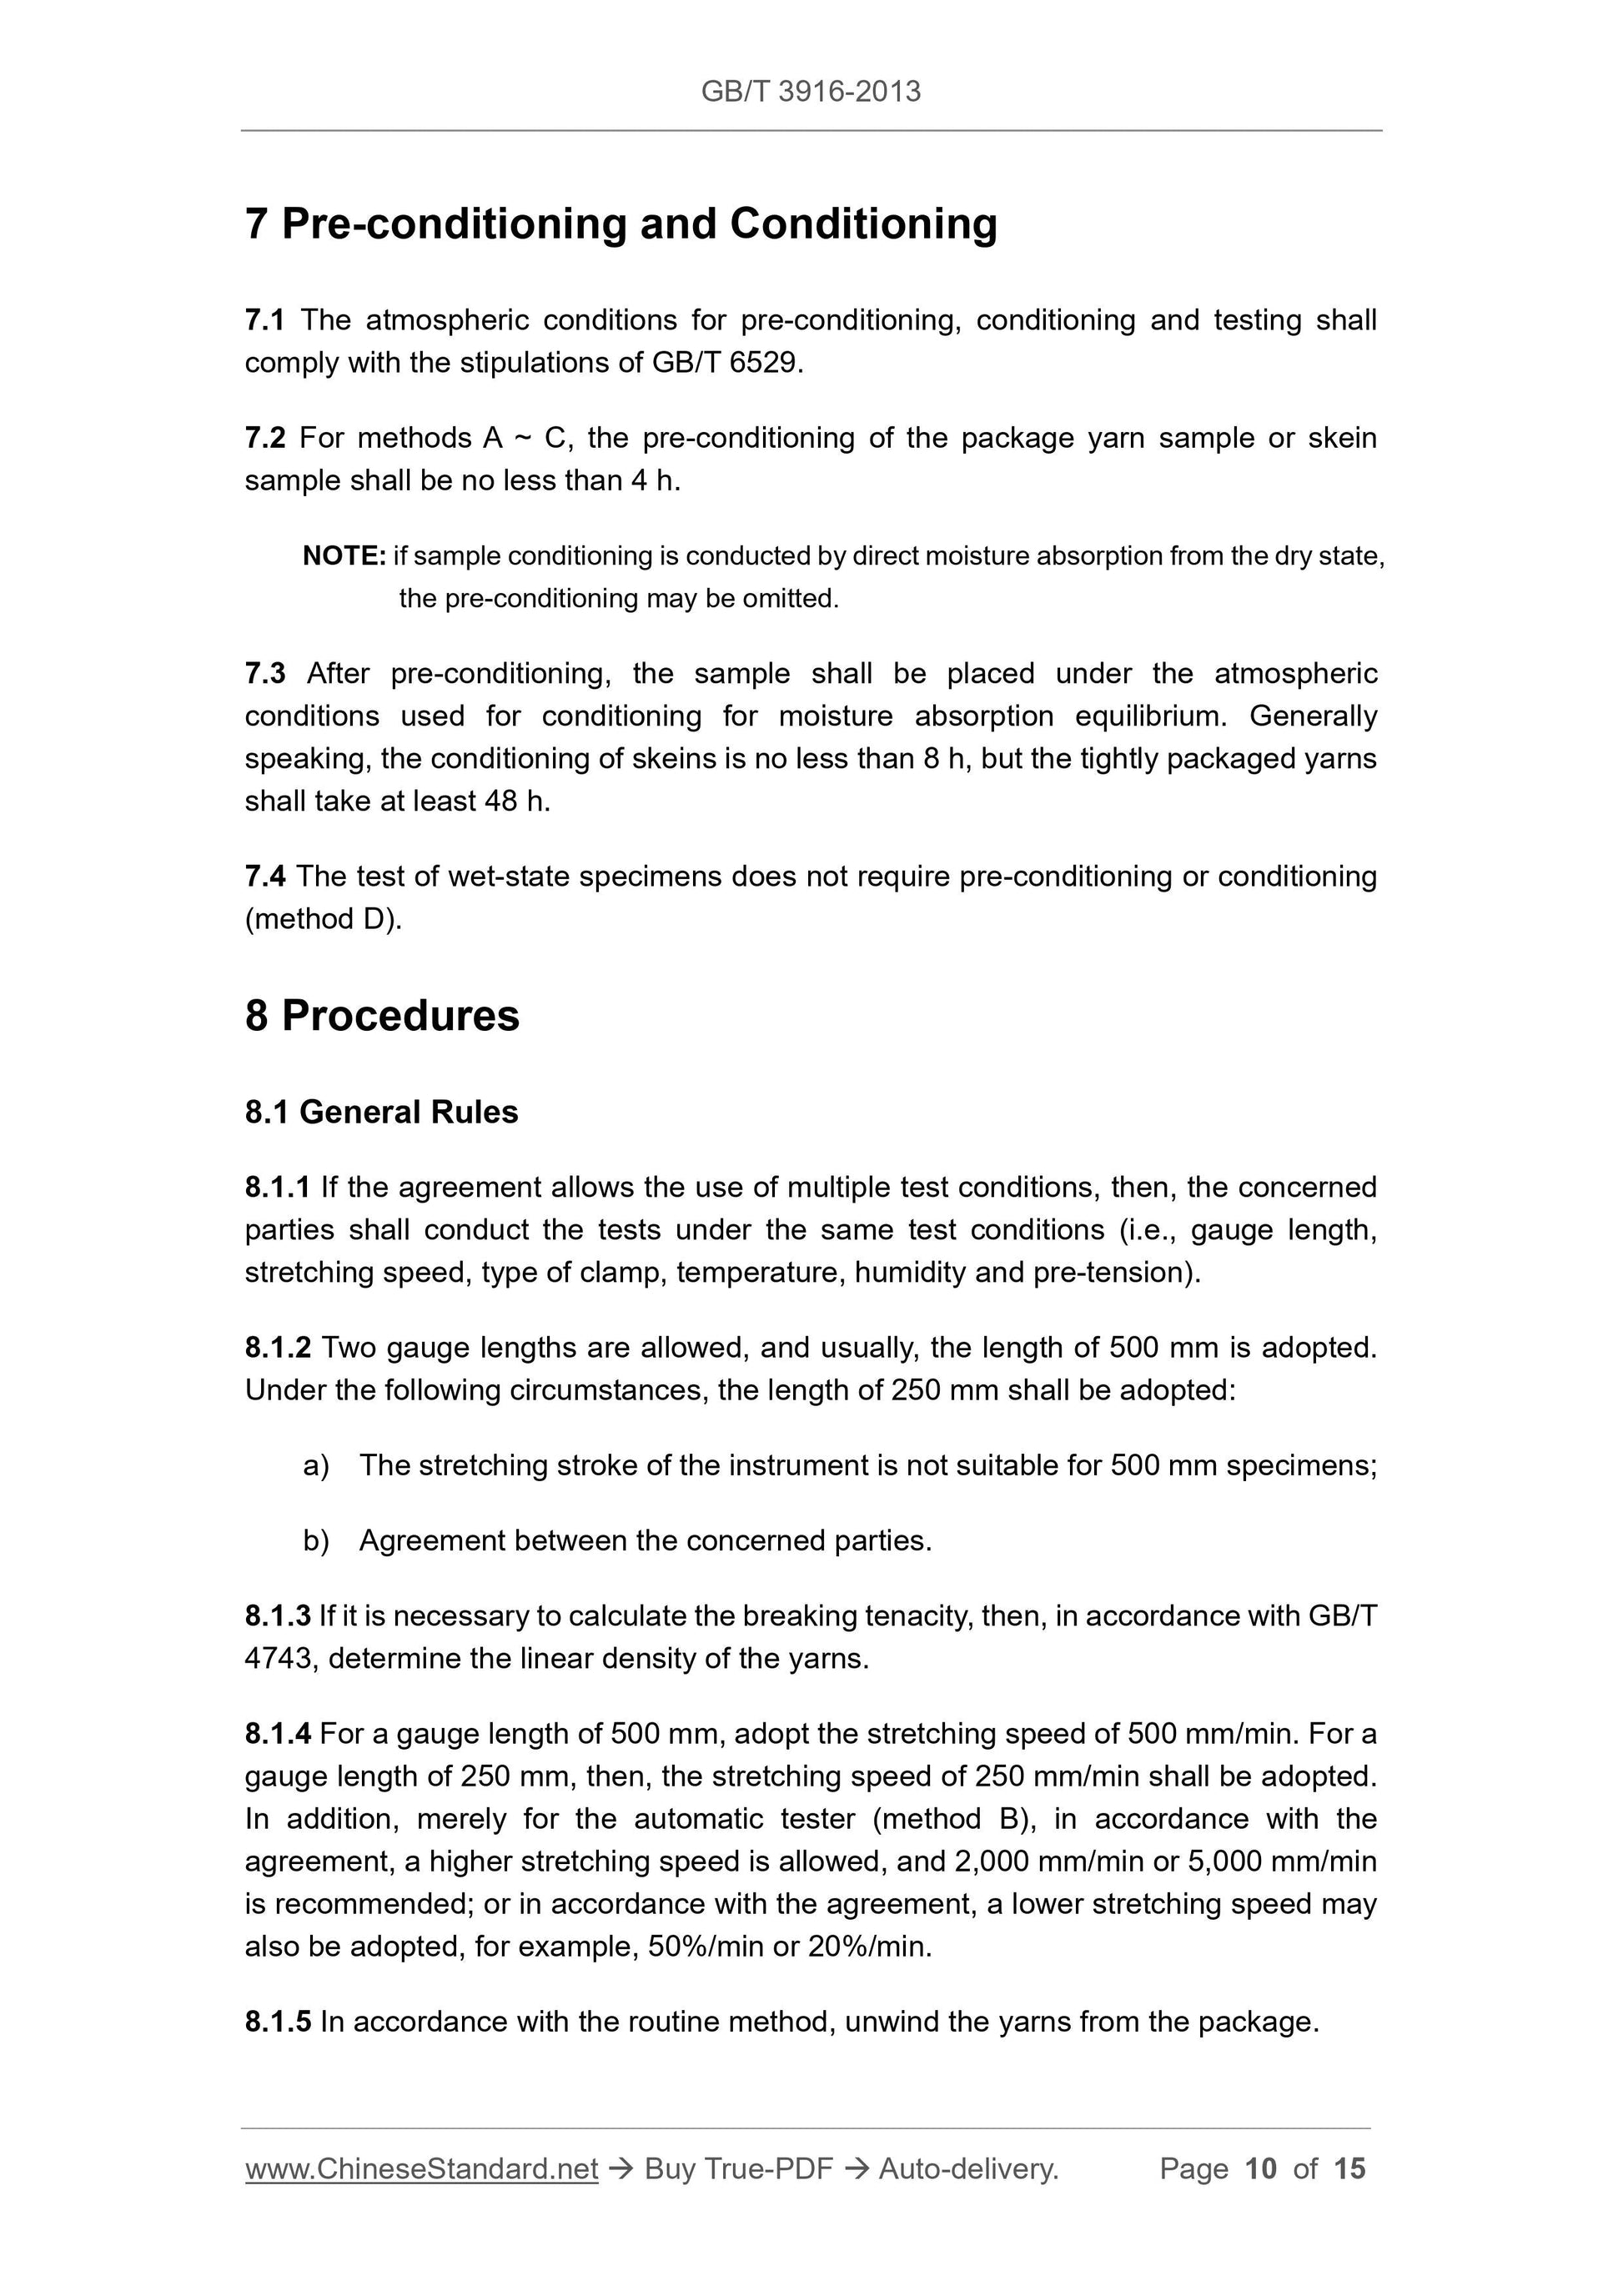 GB/T 3916-2013 Page 5